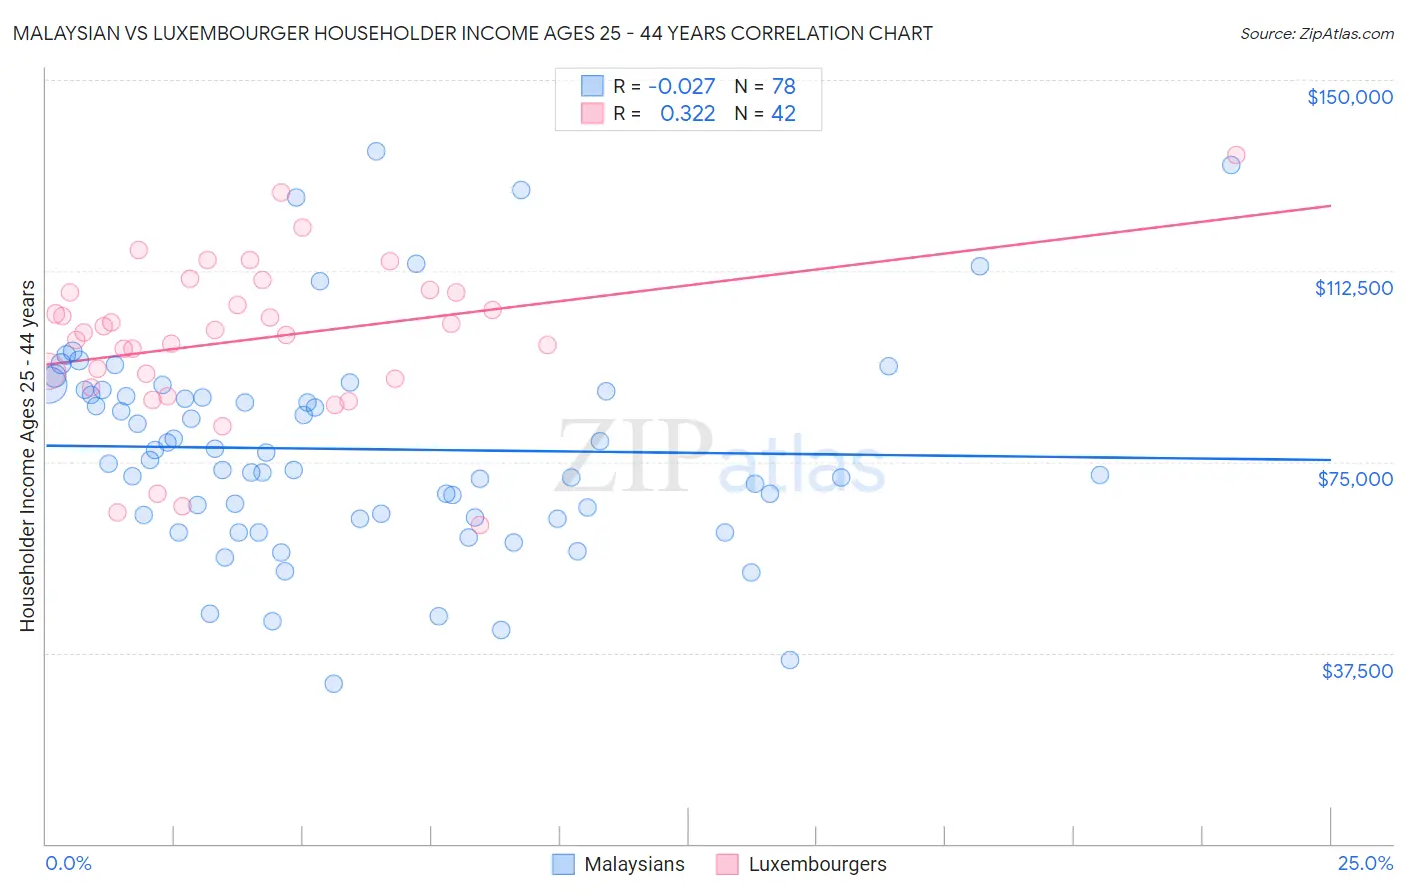 Malaysian vs Luxembourger Householder Income Ages 25 - 44 years